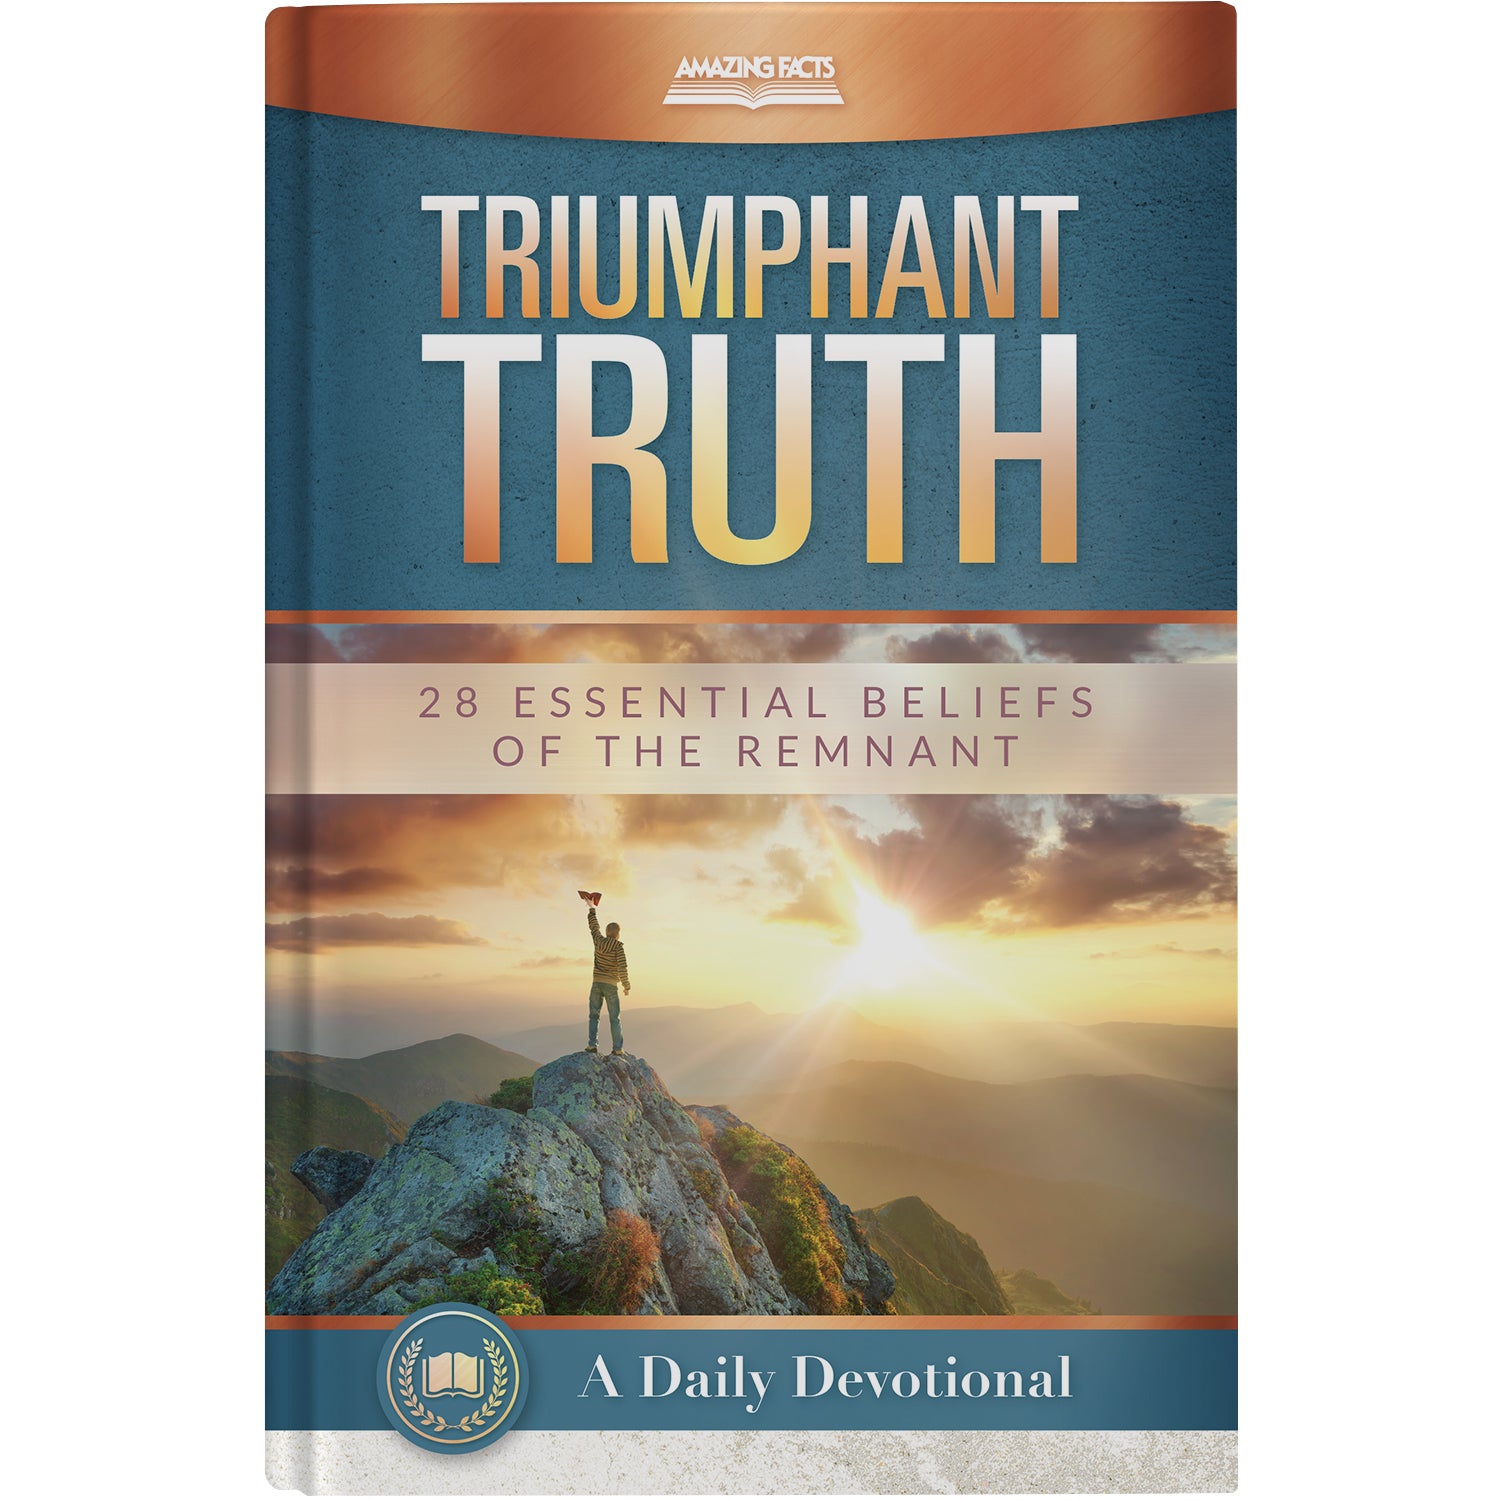 (Hardcover) Triumphant Truth: A Daily Devotional by Amazing Facts